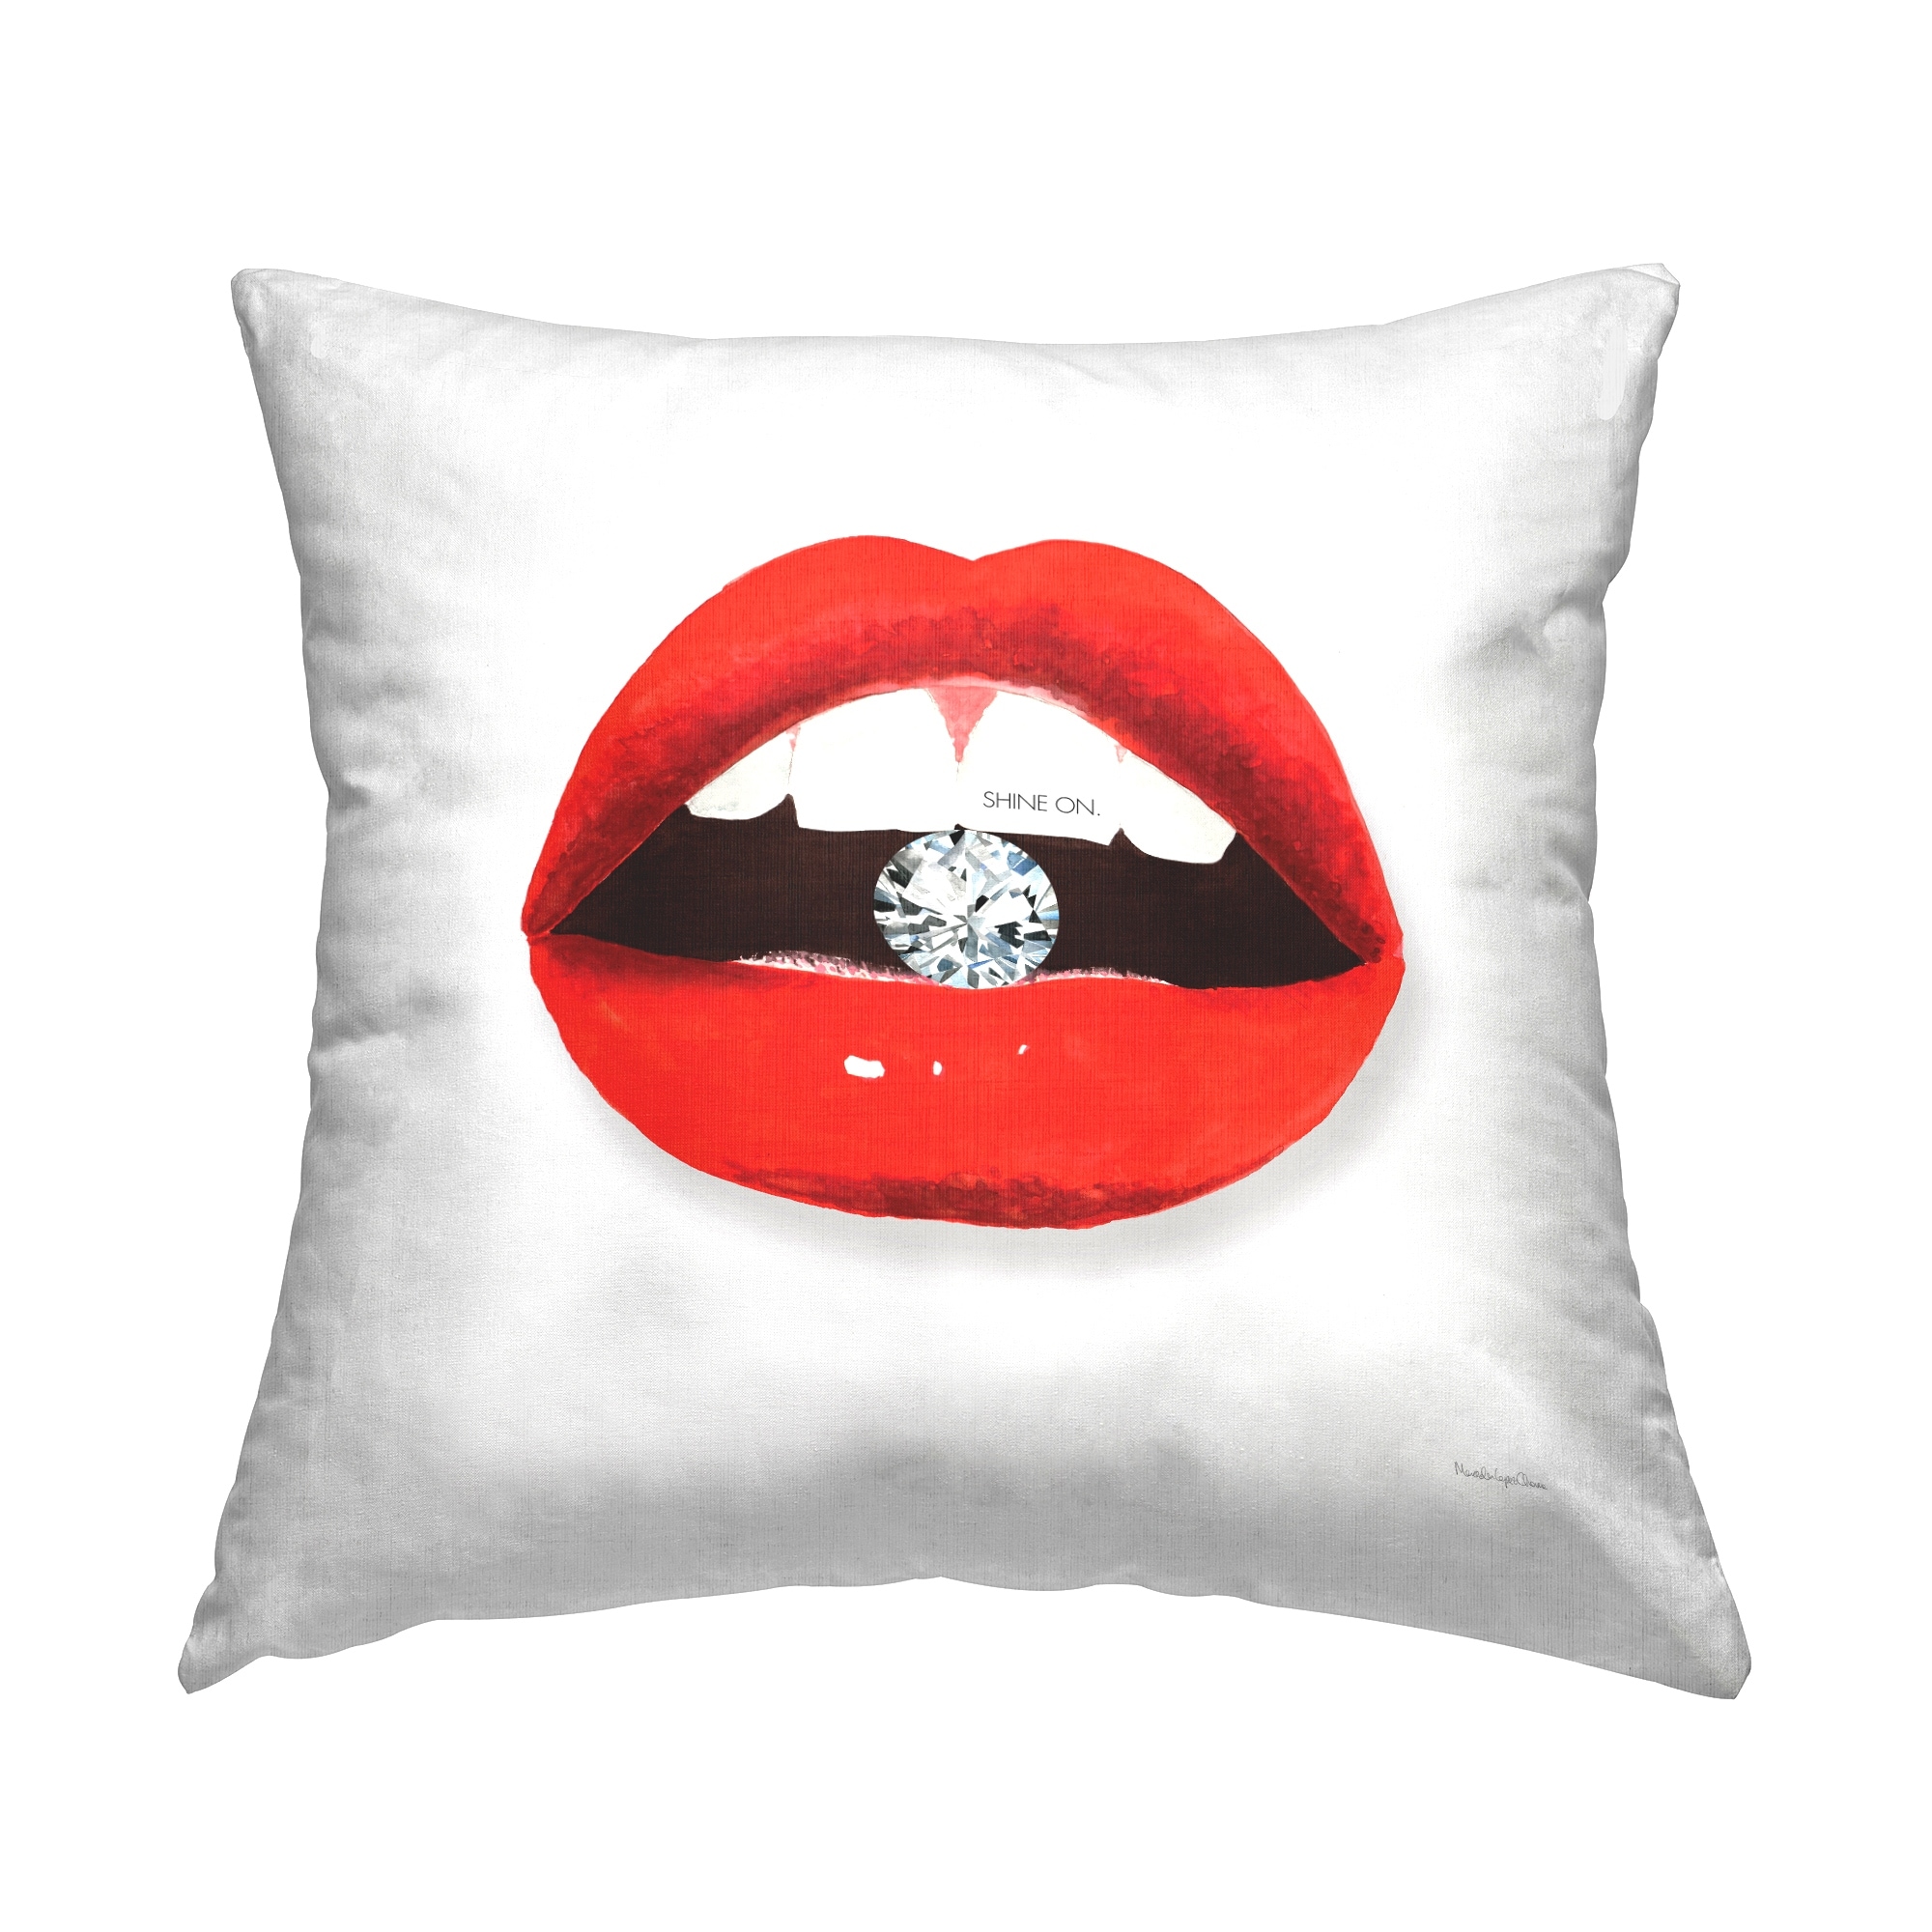 Stupell Industries Shine On Lips Biting Diamond Printed Throw Pillow Design  by Mercedes Lopez Charro - On Sale - Bed Bath & Beyond - 37955383